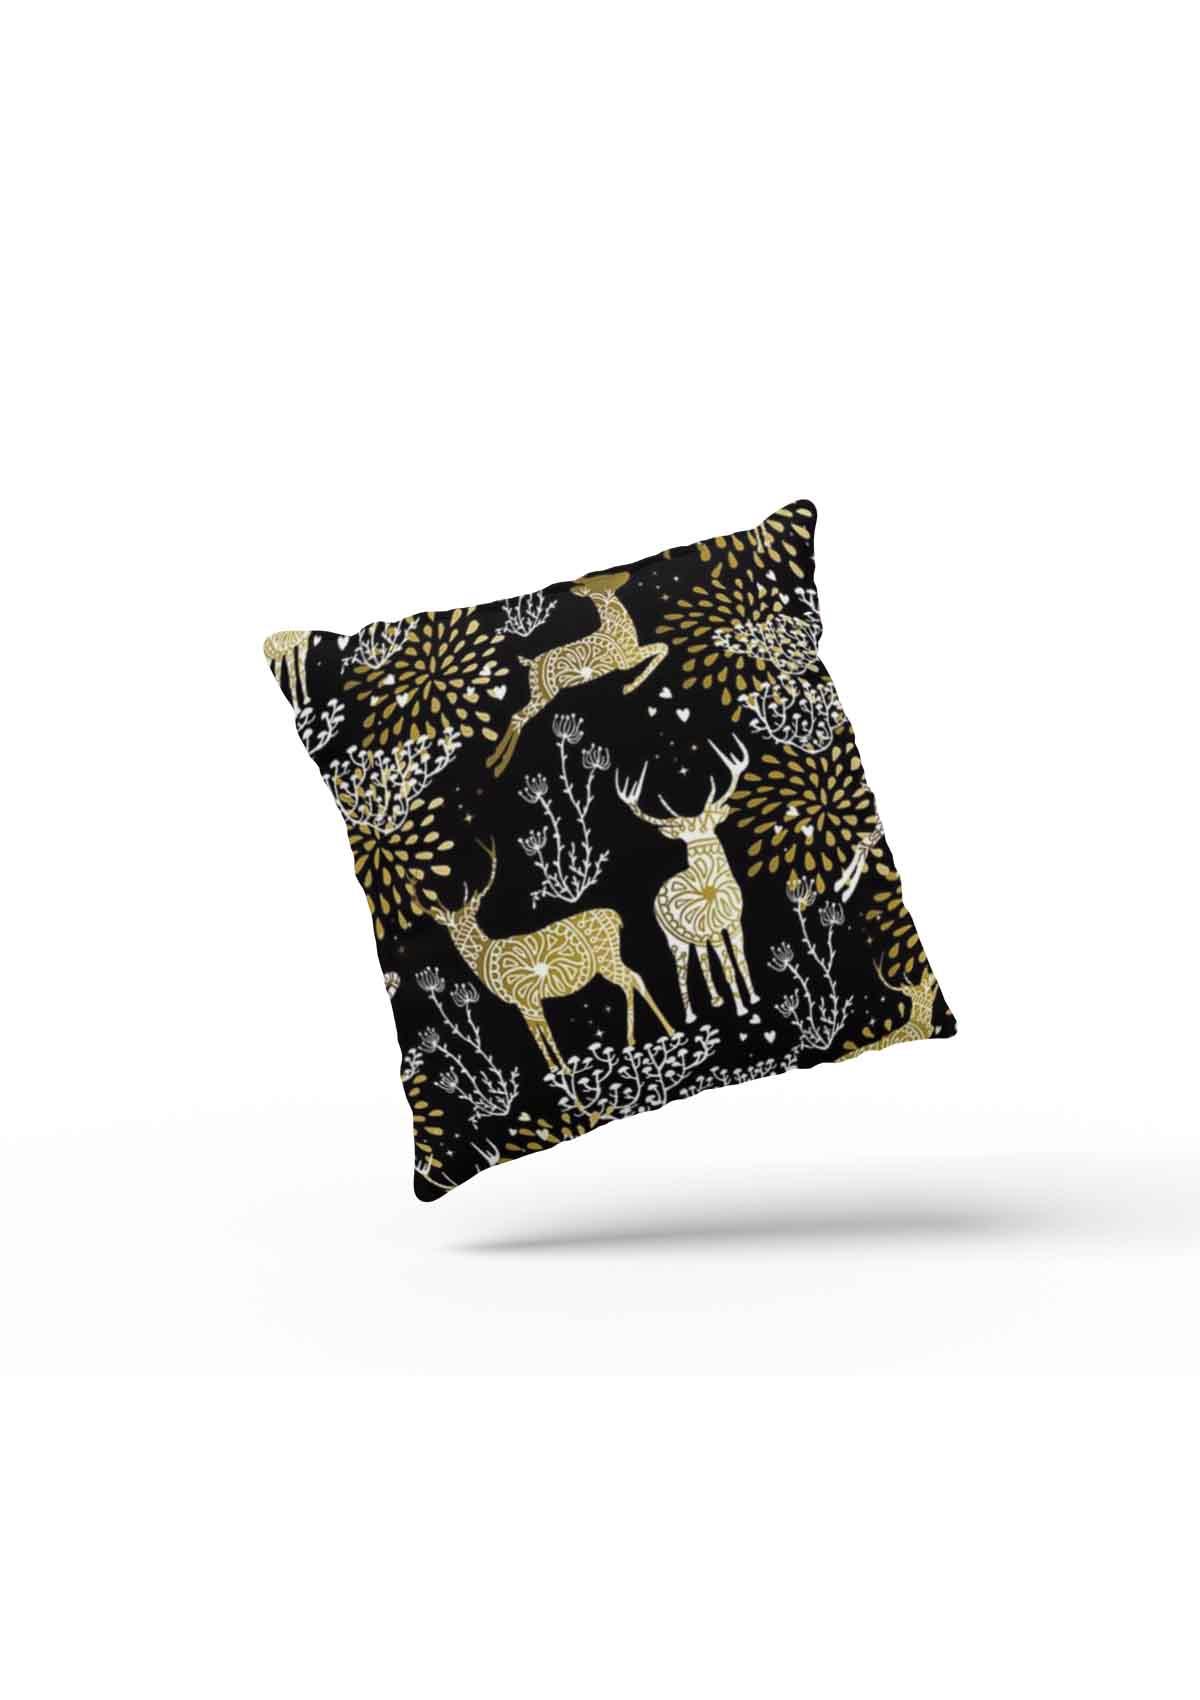 Opulent Gold and Silver Christmas Cushion Cover with GOLD Accents